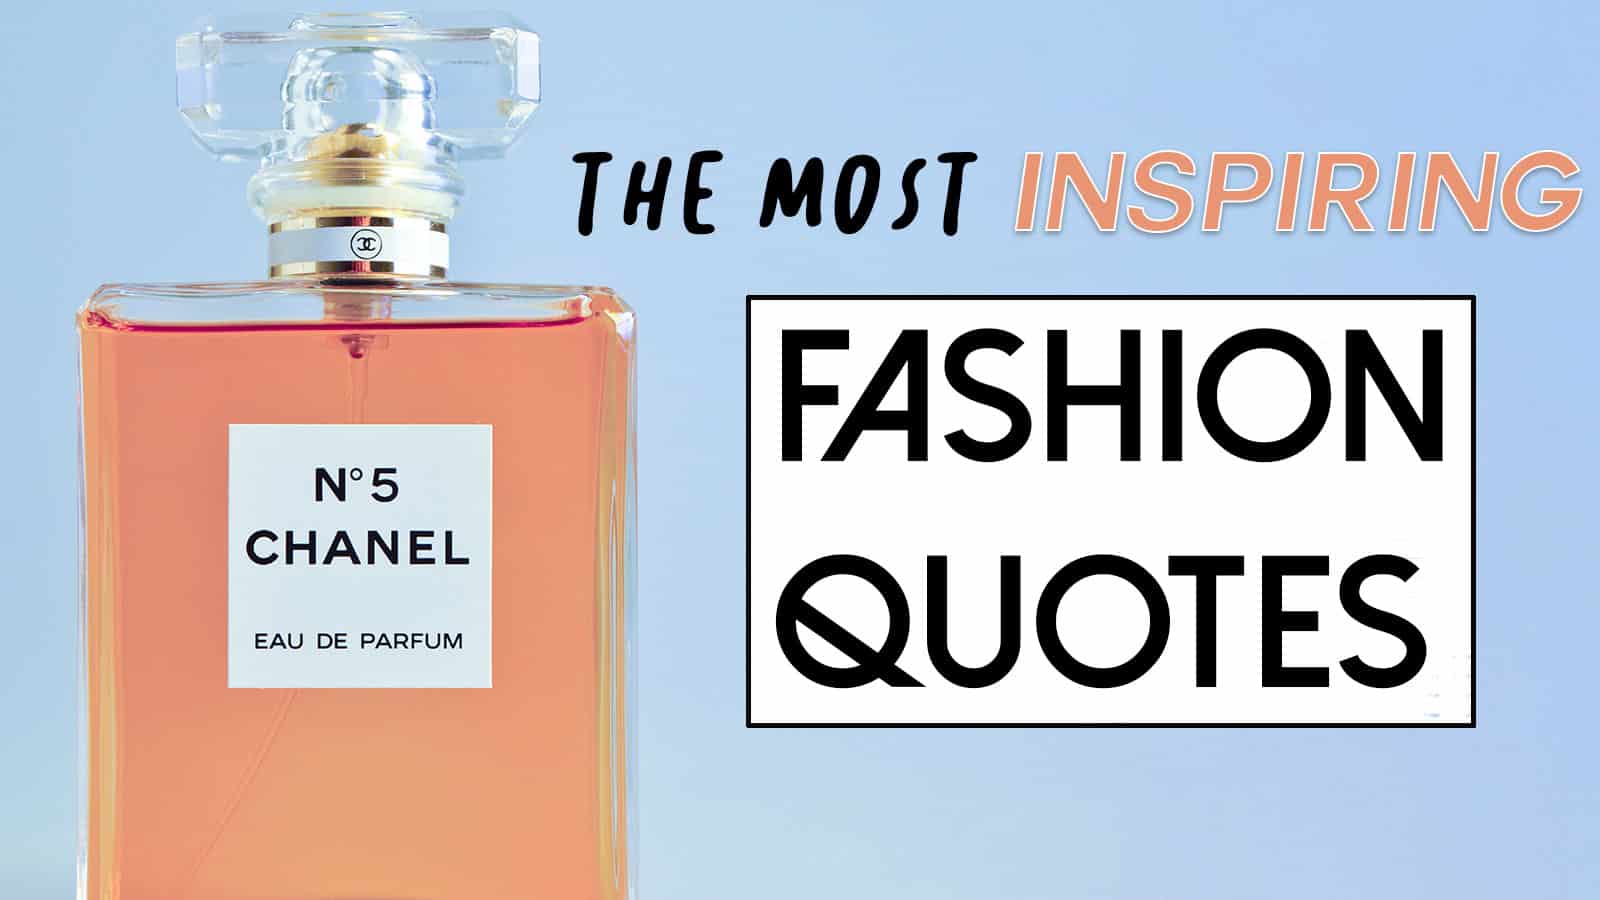 The Most Inspiring Fashion Quotes for When You Need a Pick Me Up